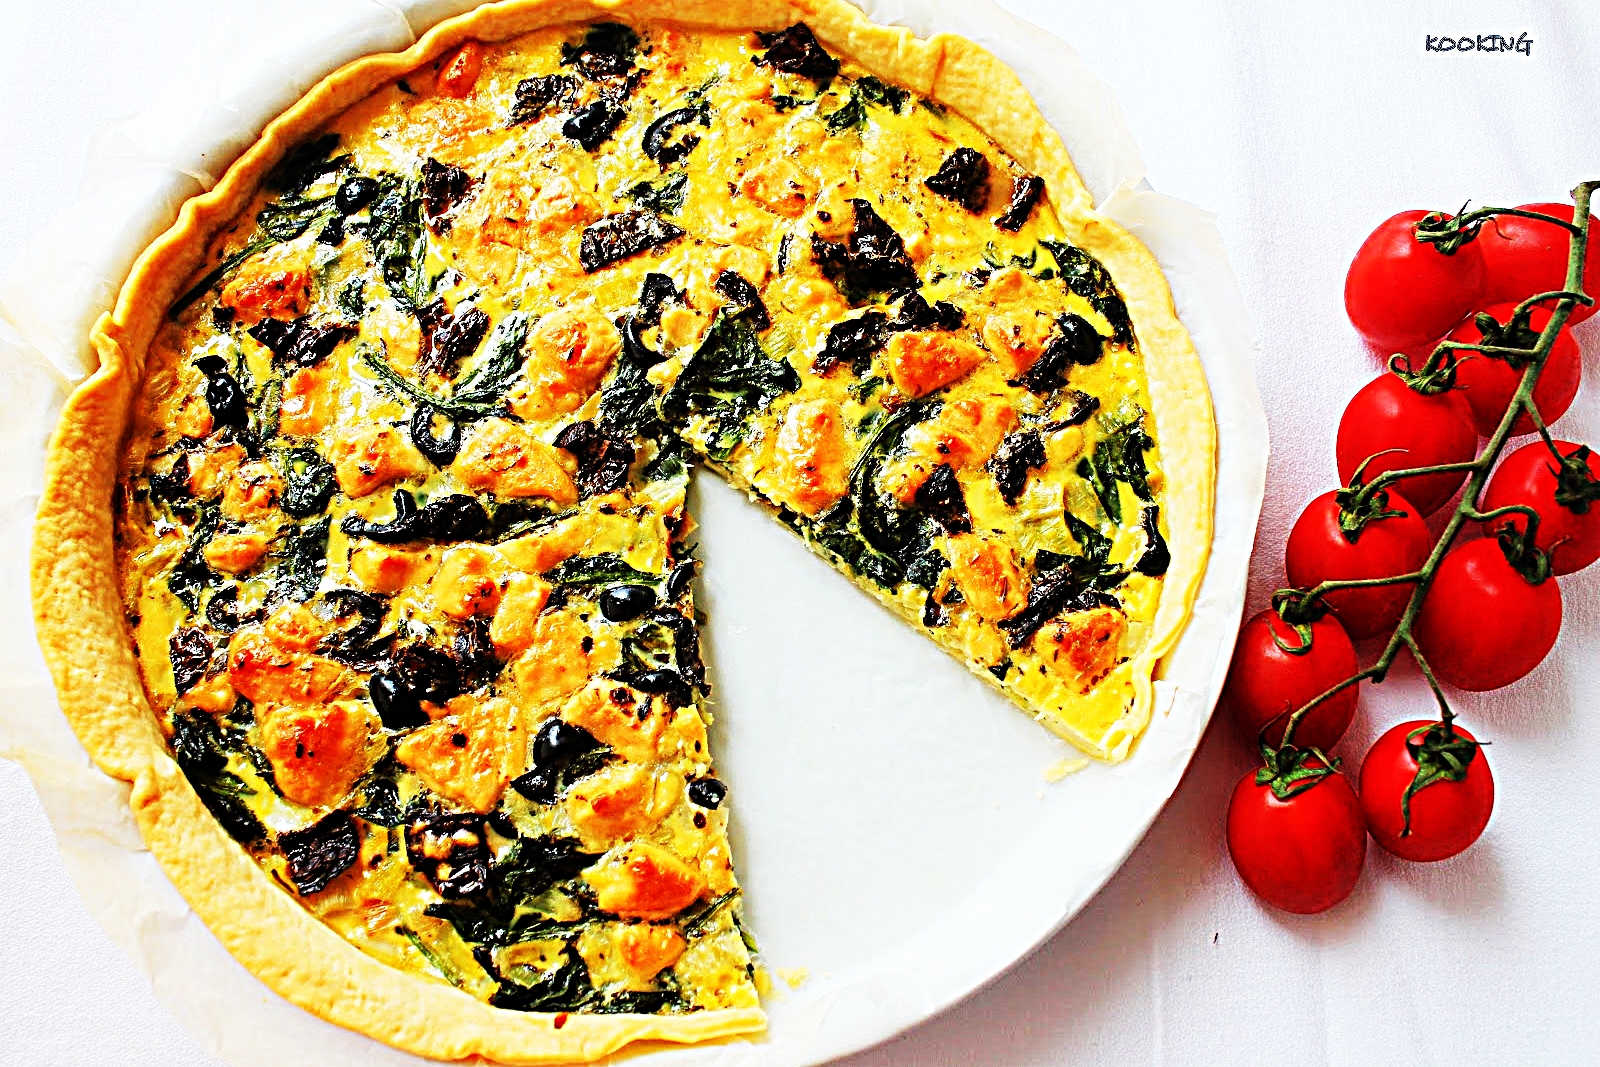 Stupid-Easy Recipe for Mediterranean Tart (#1 Top-Rated)